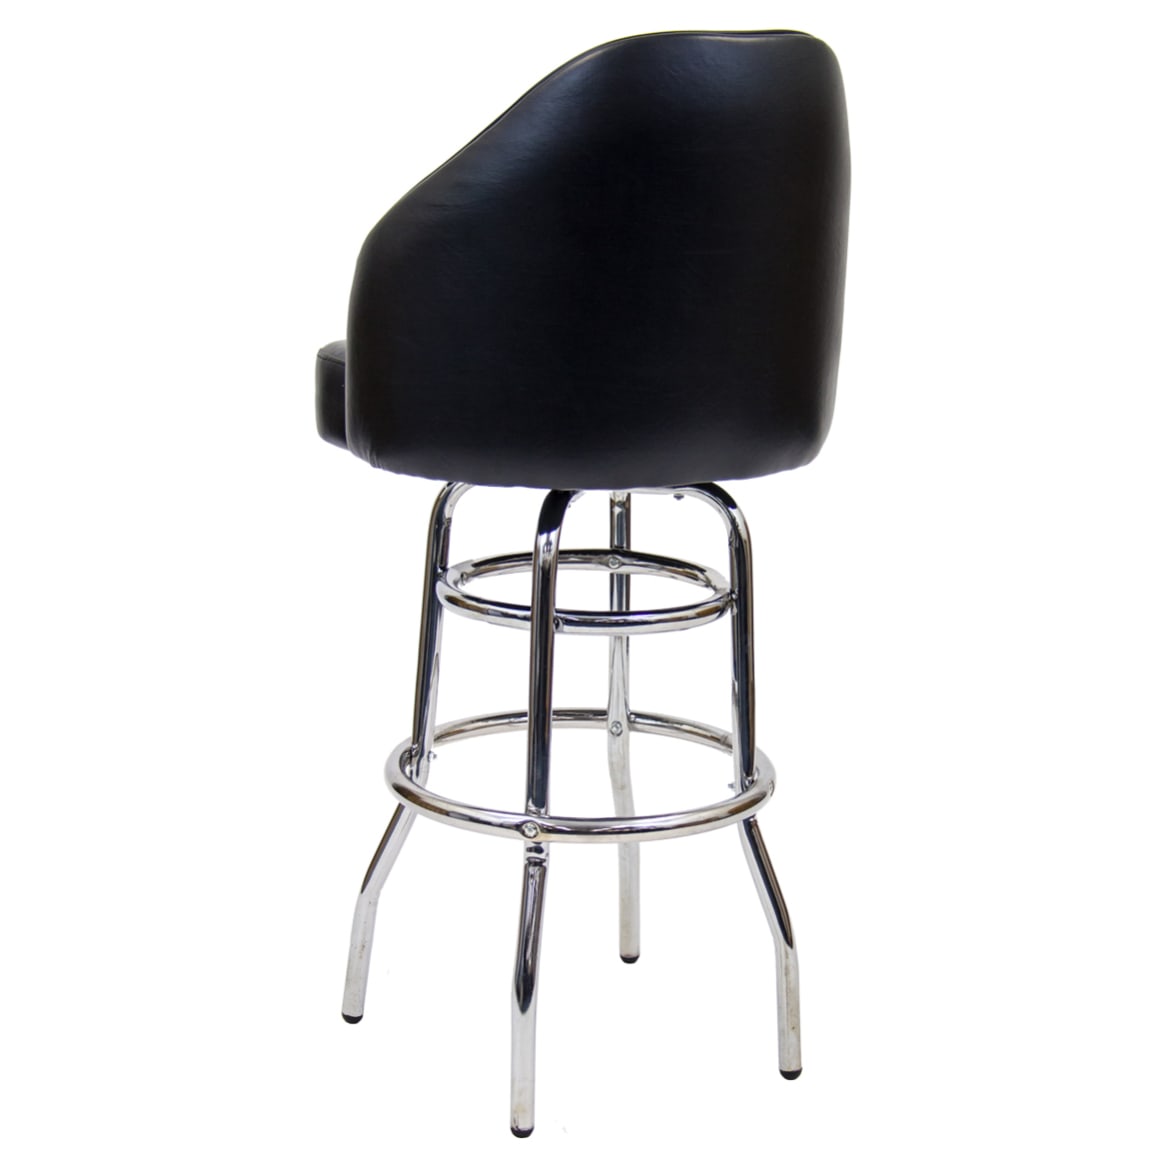 Commercial Quality Double Ring Chrome Bar Stool with Black Seat 